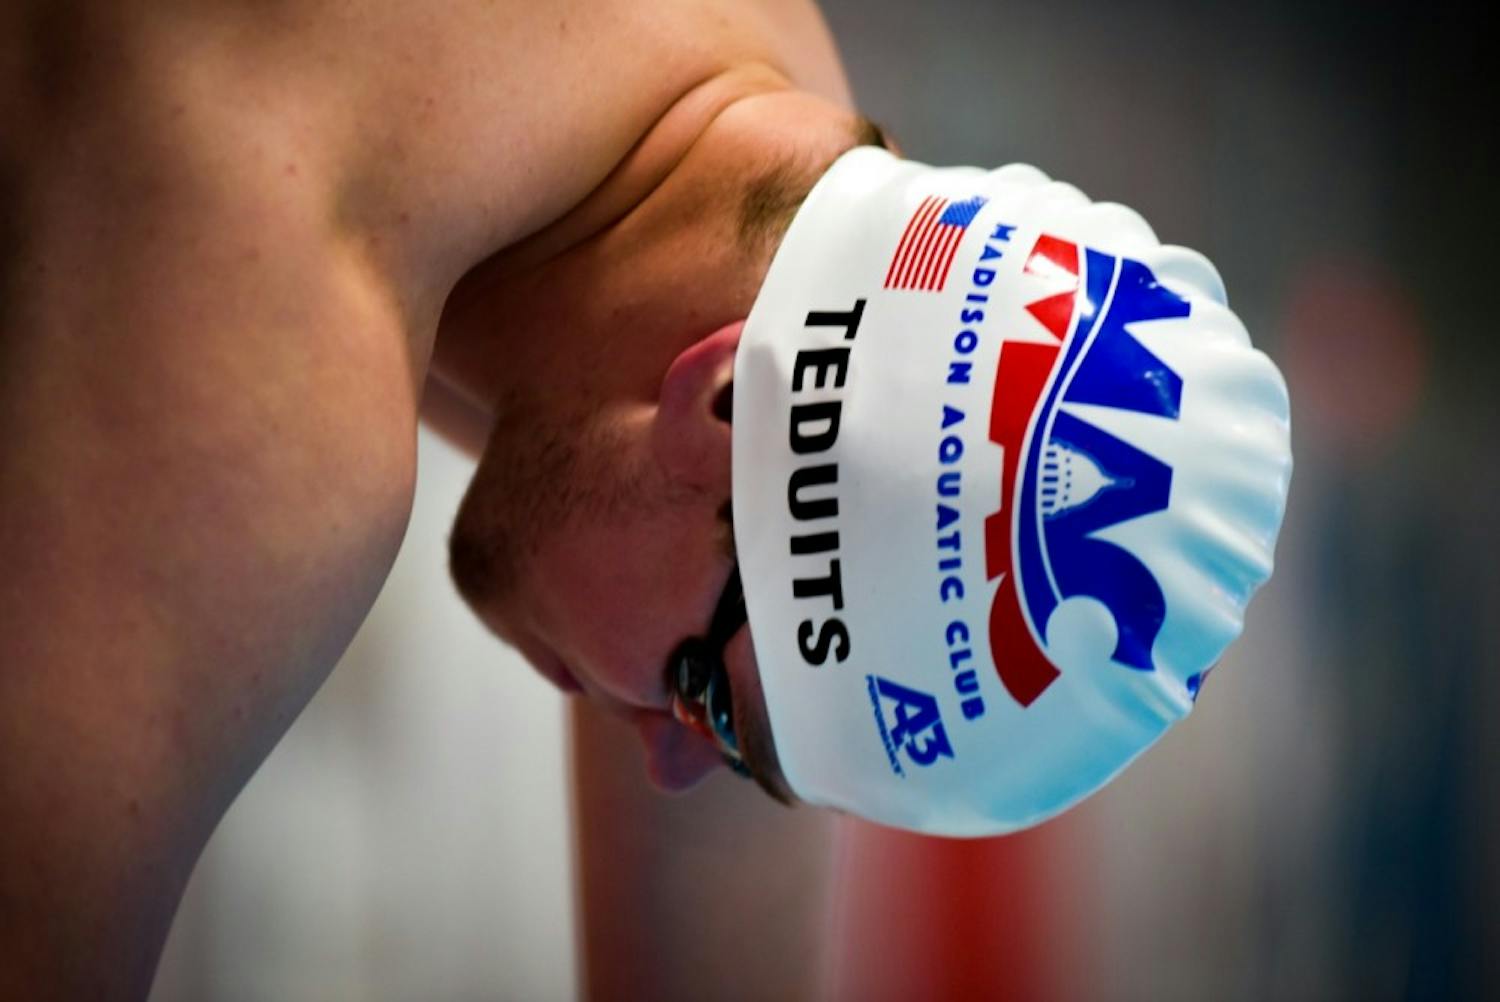 Gallery: Current and former Badger swimmers gear up for shot at Olympics